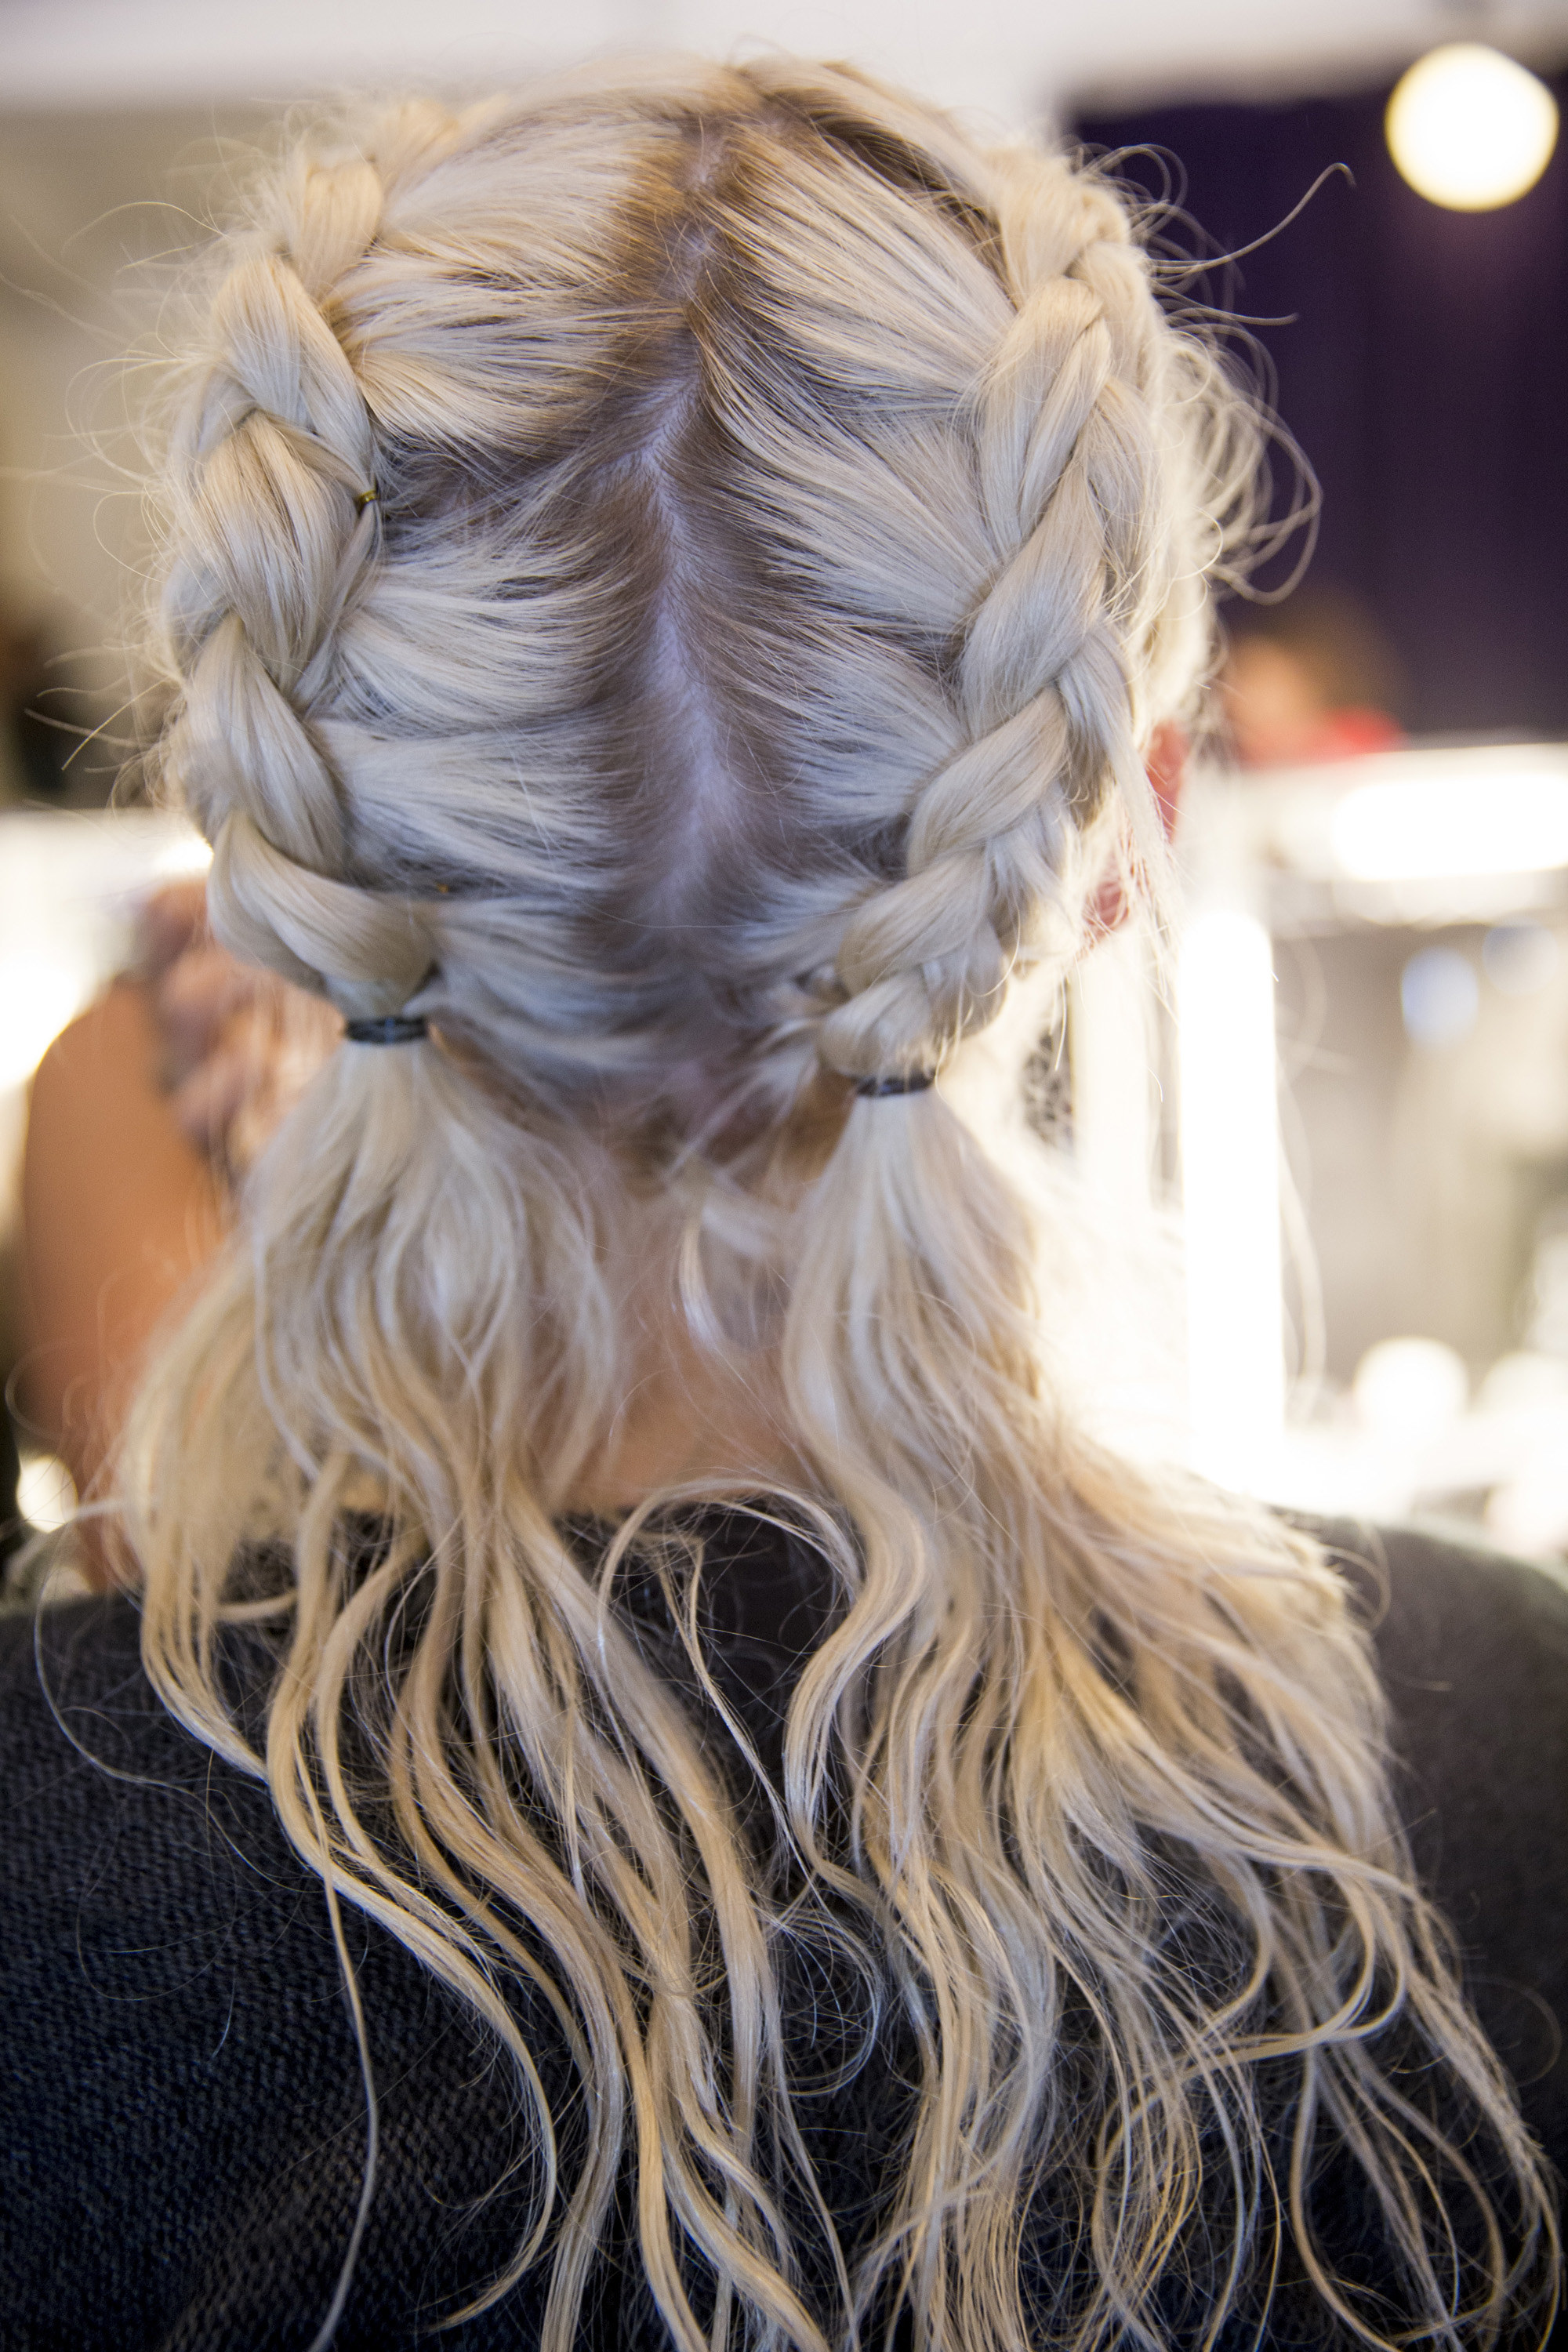 46+ Two french braid hairstyles ideas